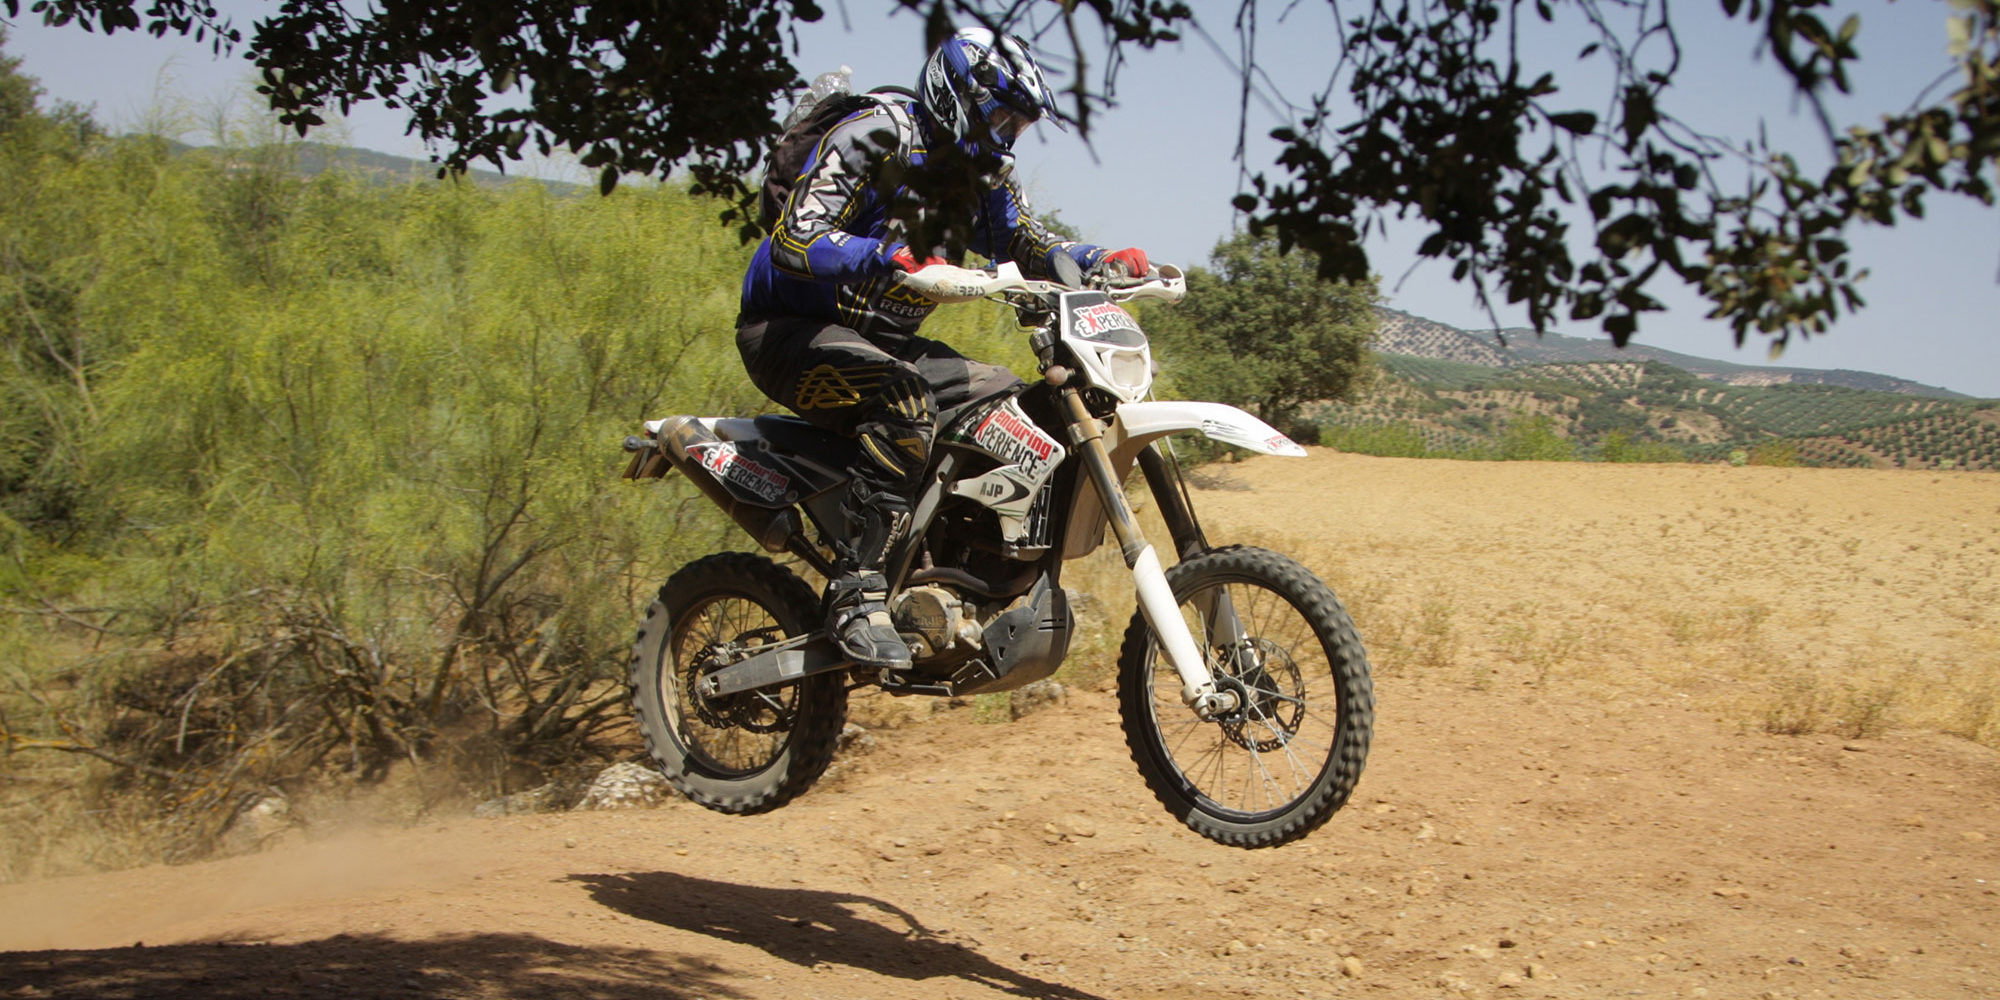 off-road trail riding Motorcycle day tours and excursions near Torremolinos, Benalmadina and Malaga